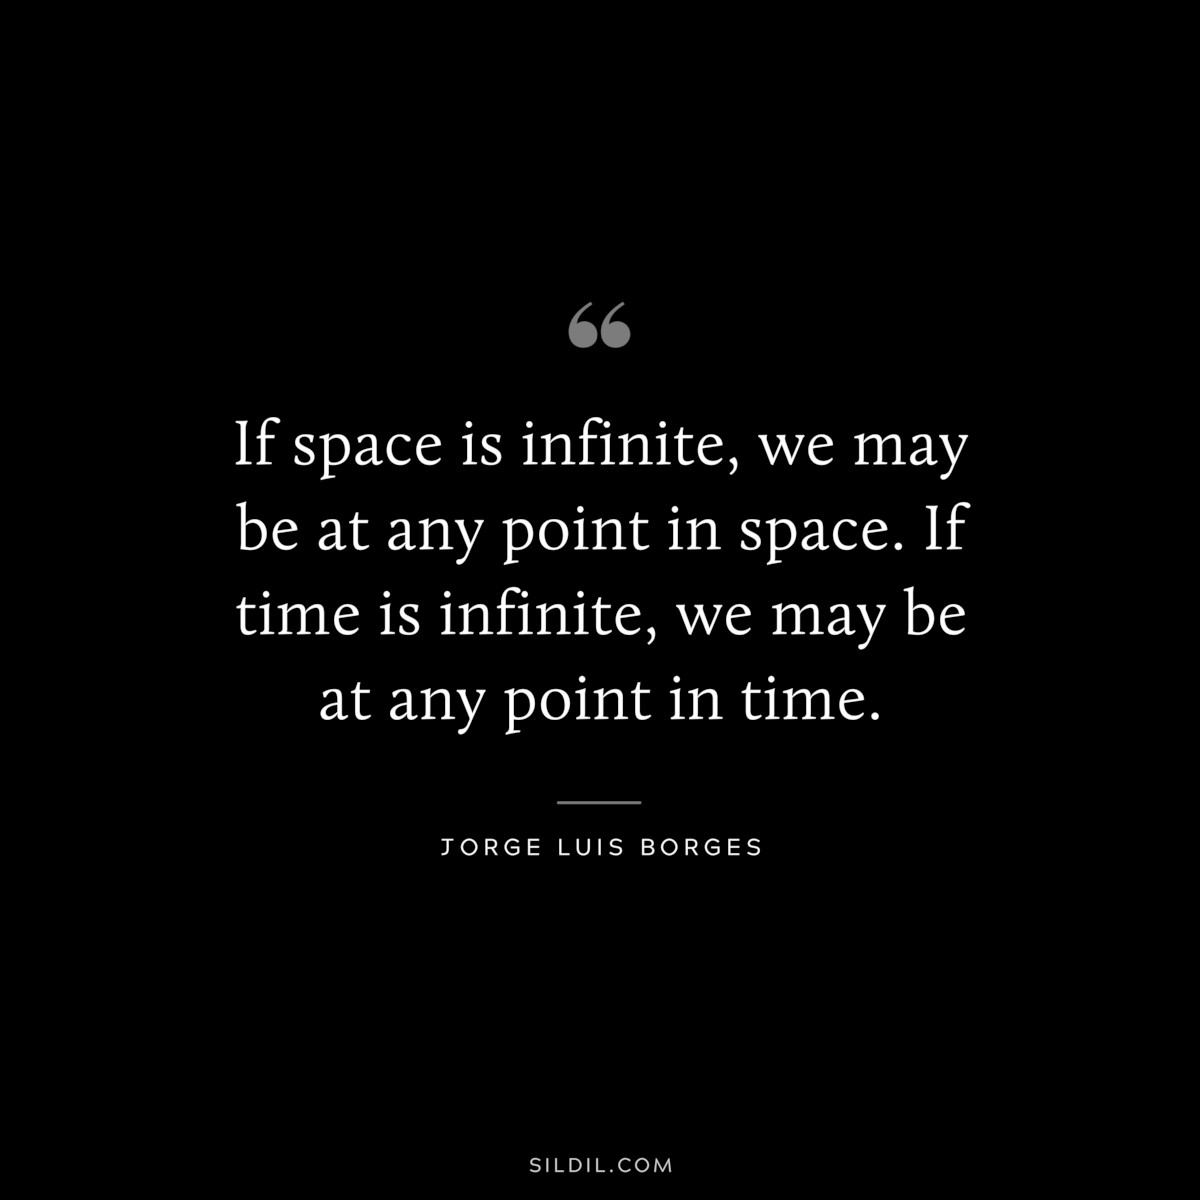 If space is infinite, we may be at any point in space. If time is infinite, we may be at any point in time. ― Jorge Luis Borges